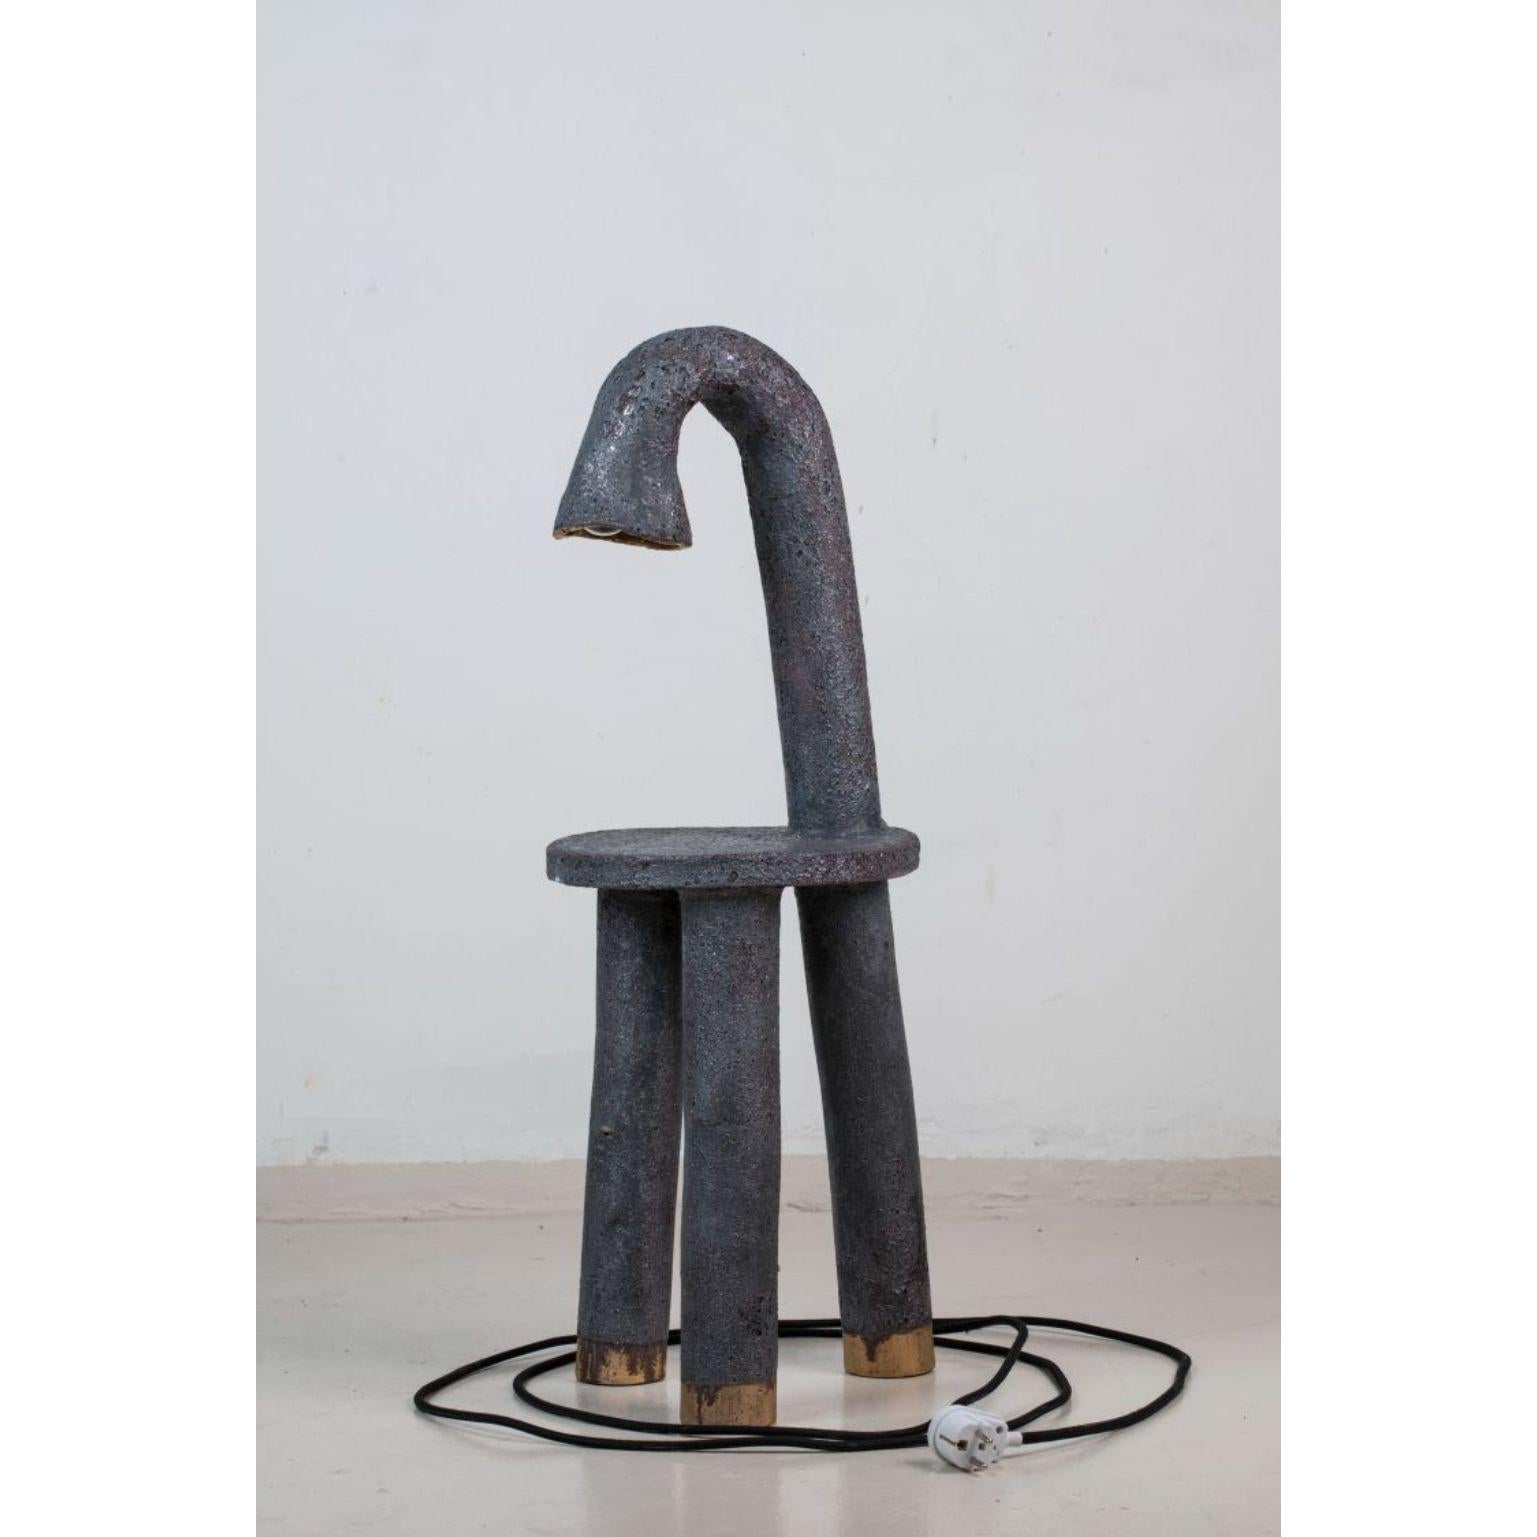 Big Lamp with table by Milan Pekar
Dimensions: D x H82 cm
Materials: Glaze, clay

Hand-made in the Czech Republic

Established own studio August 2009 – Focus mainly on porcelain, developing own glazes. Mould makings, and Slip casting. Milan